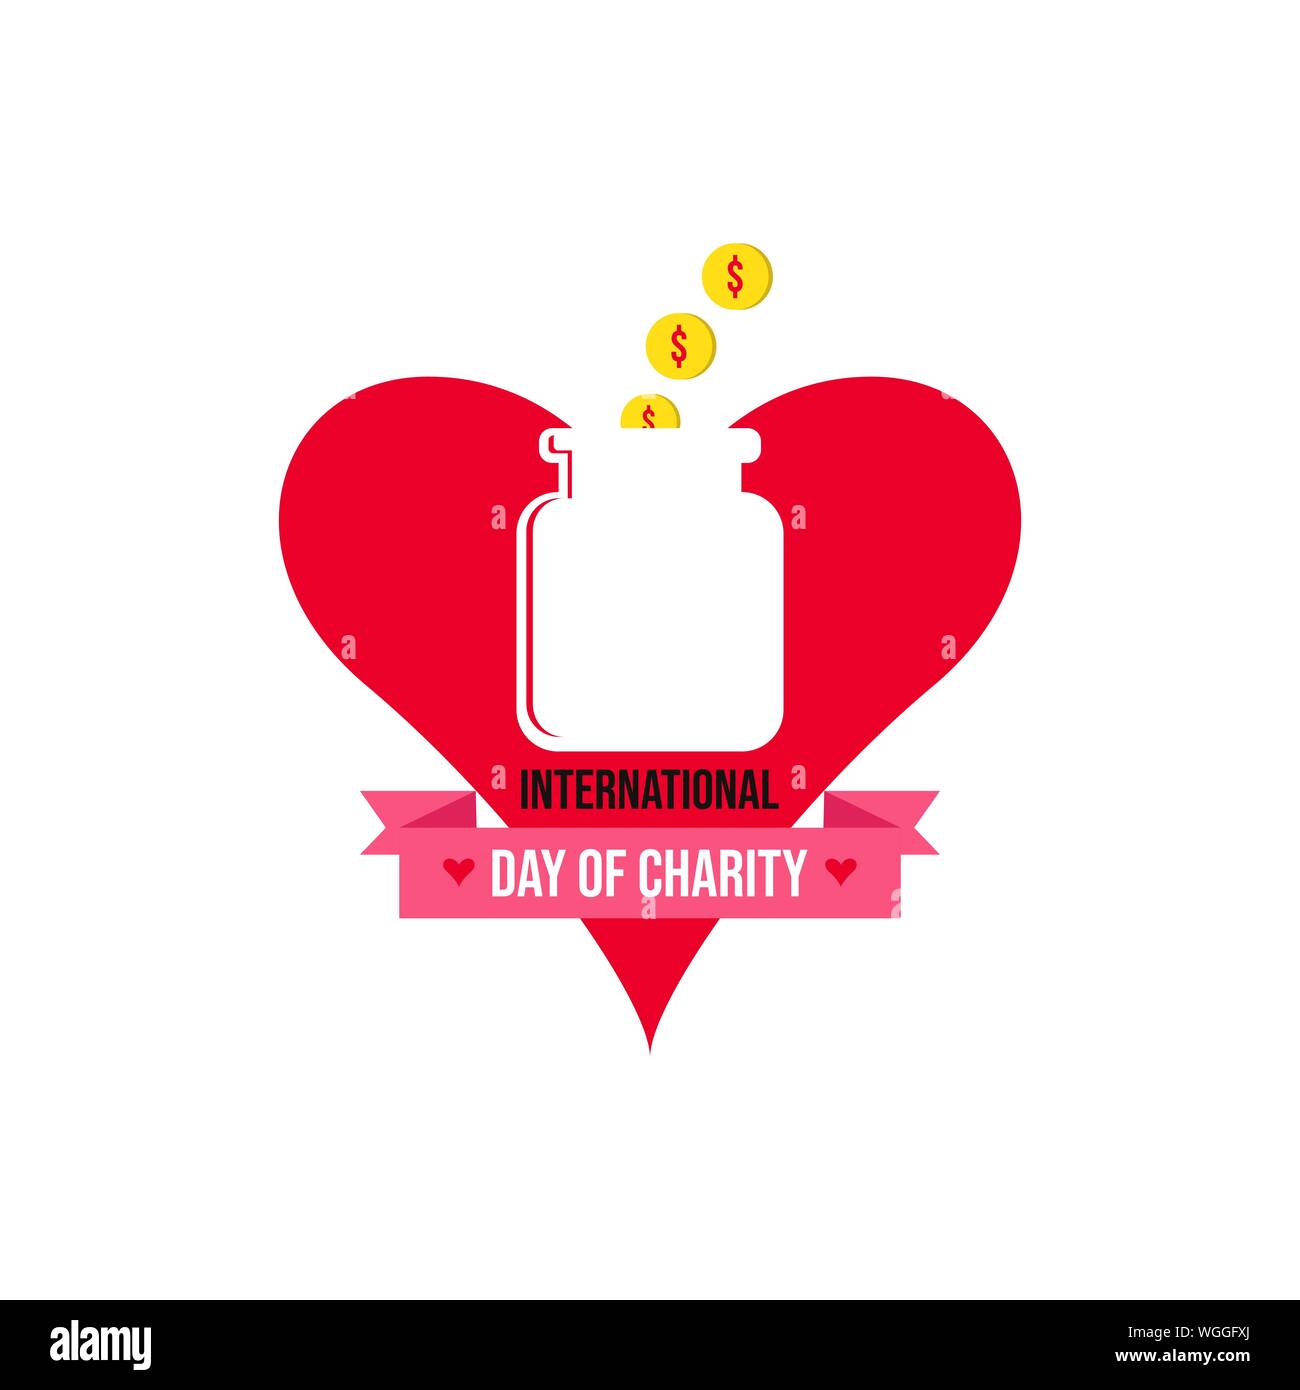 International donations on the international day of charity vector banner and poster image Stock Vector